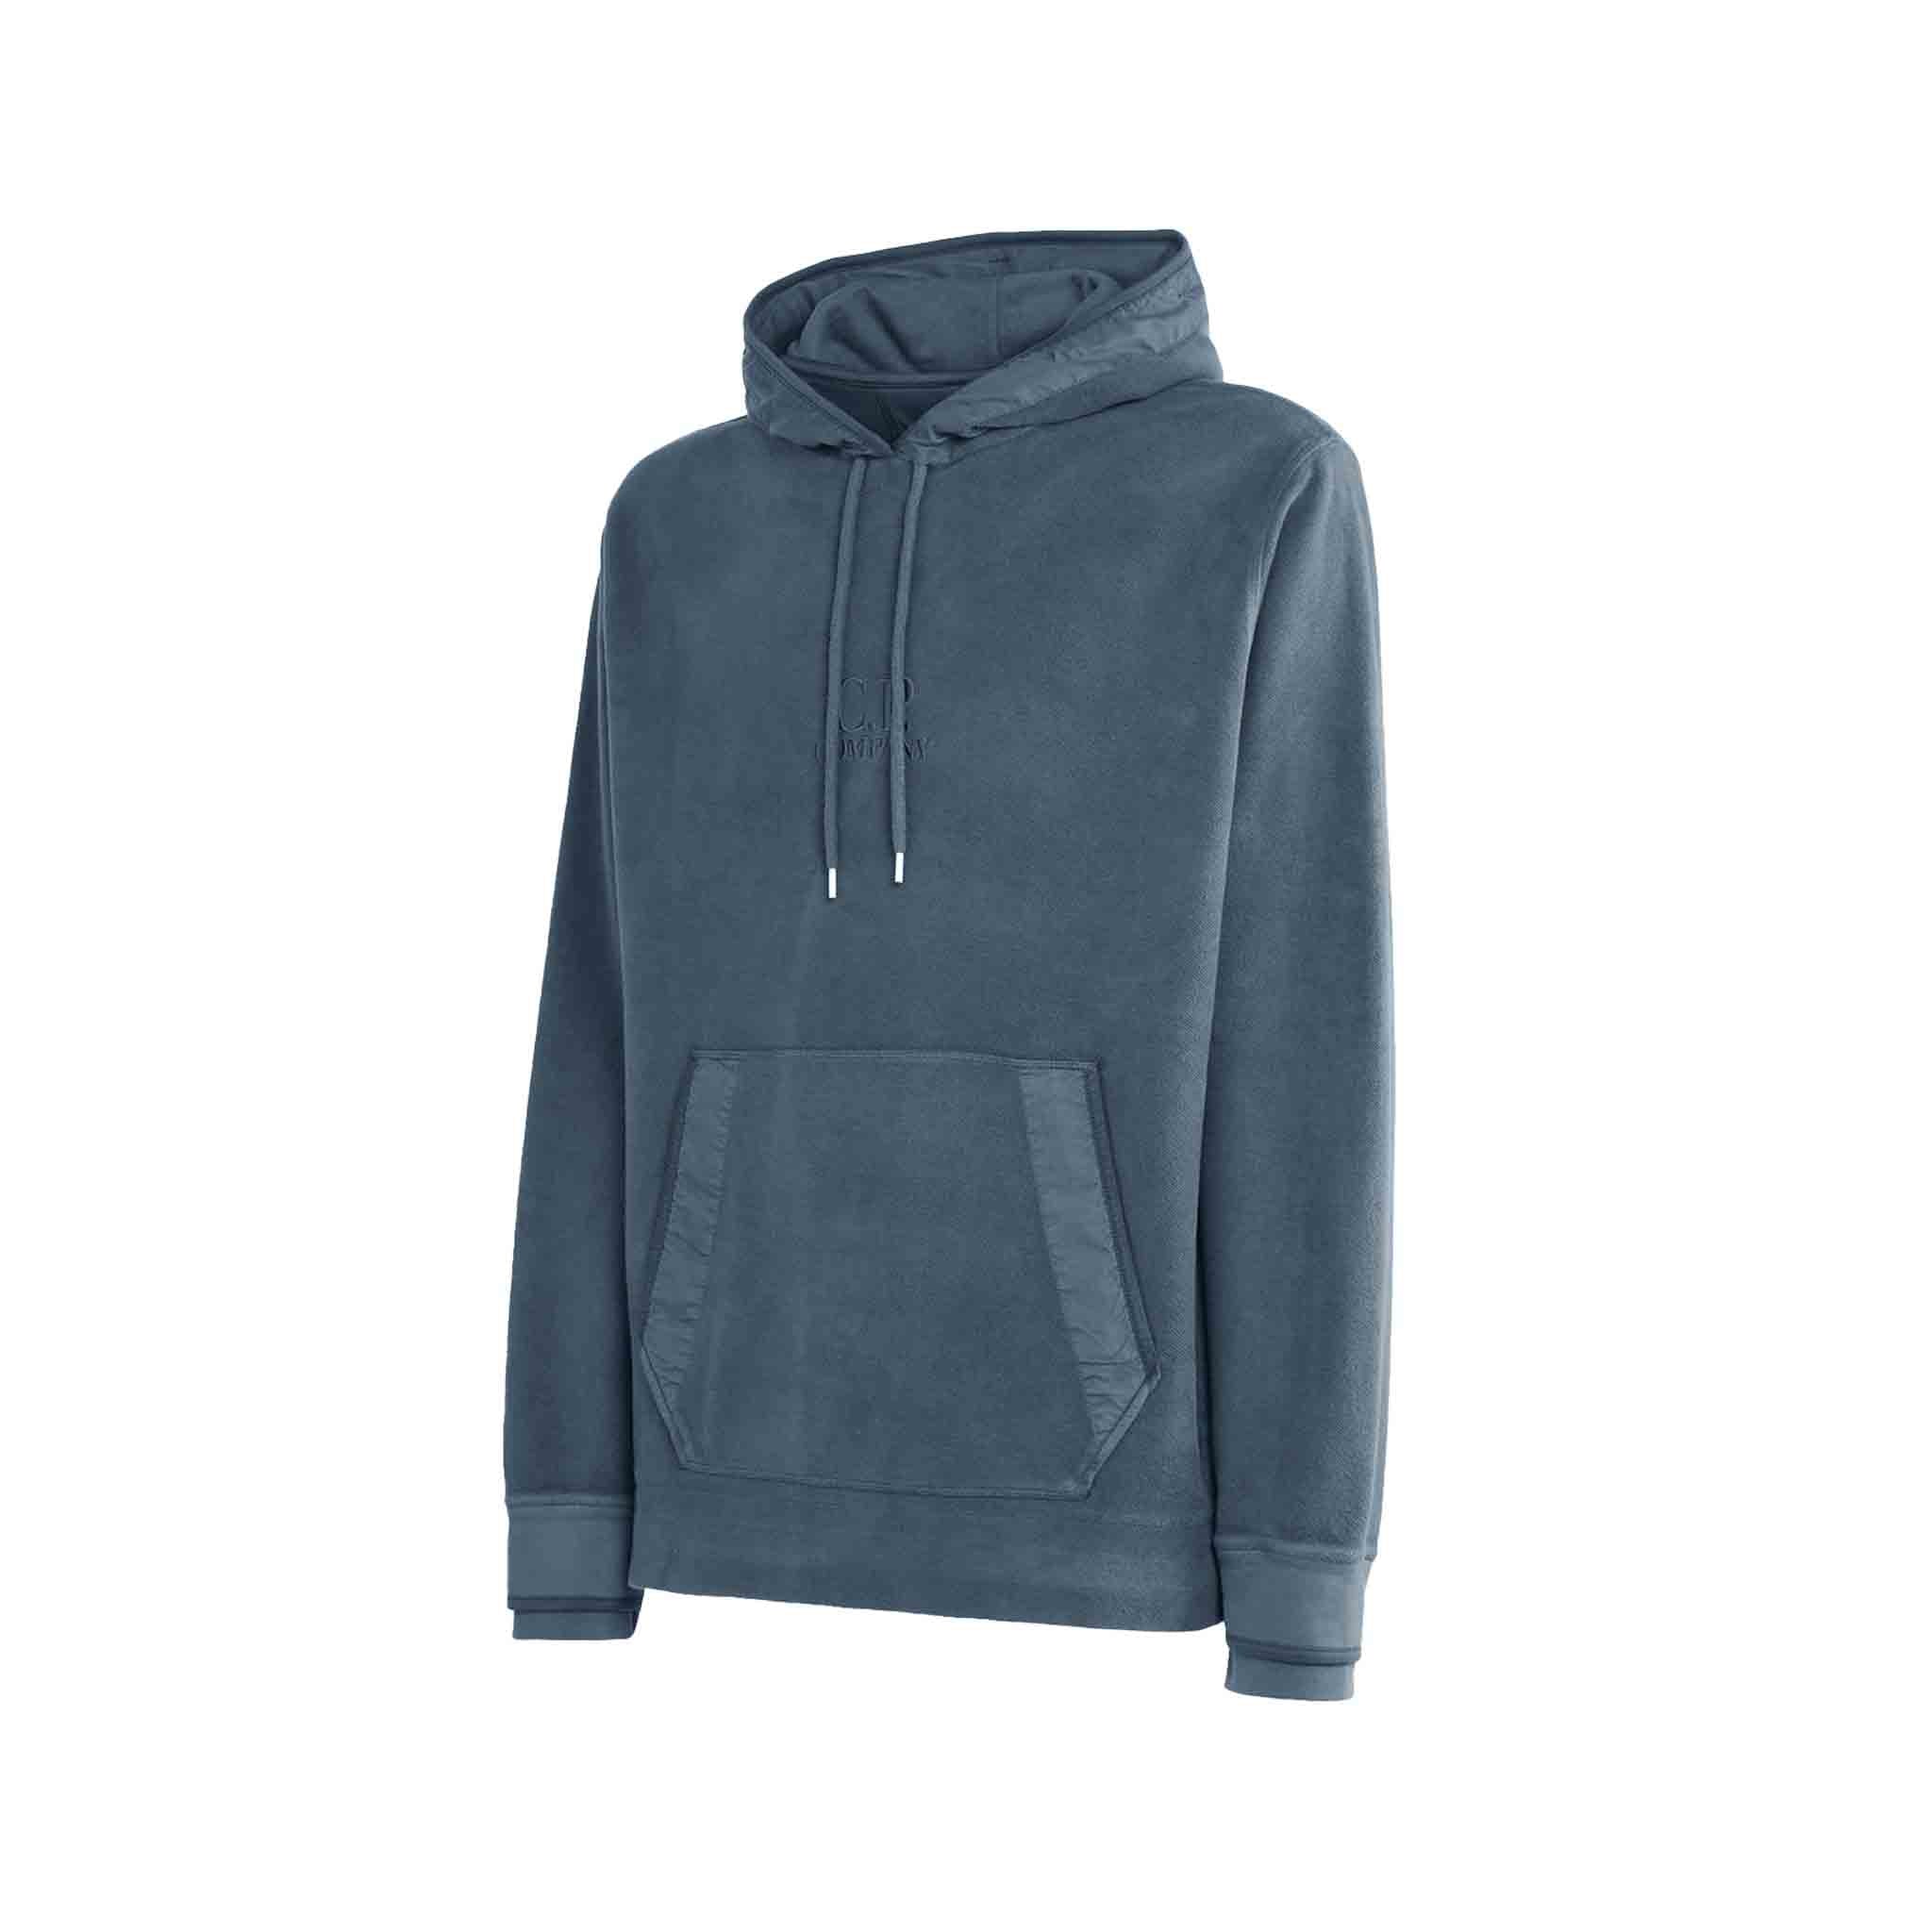 C.P. Company Reverse Brushed & Emerized Diag Fleece Hoodie in Orion Blue